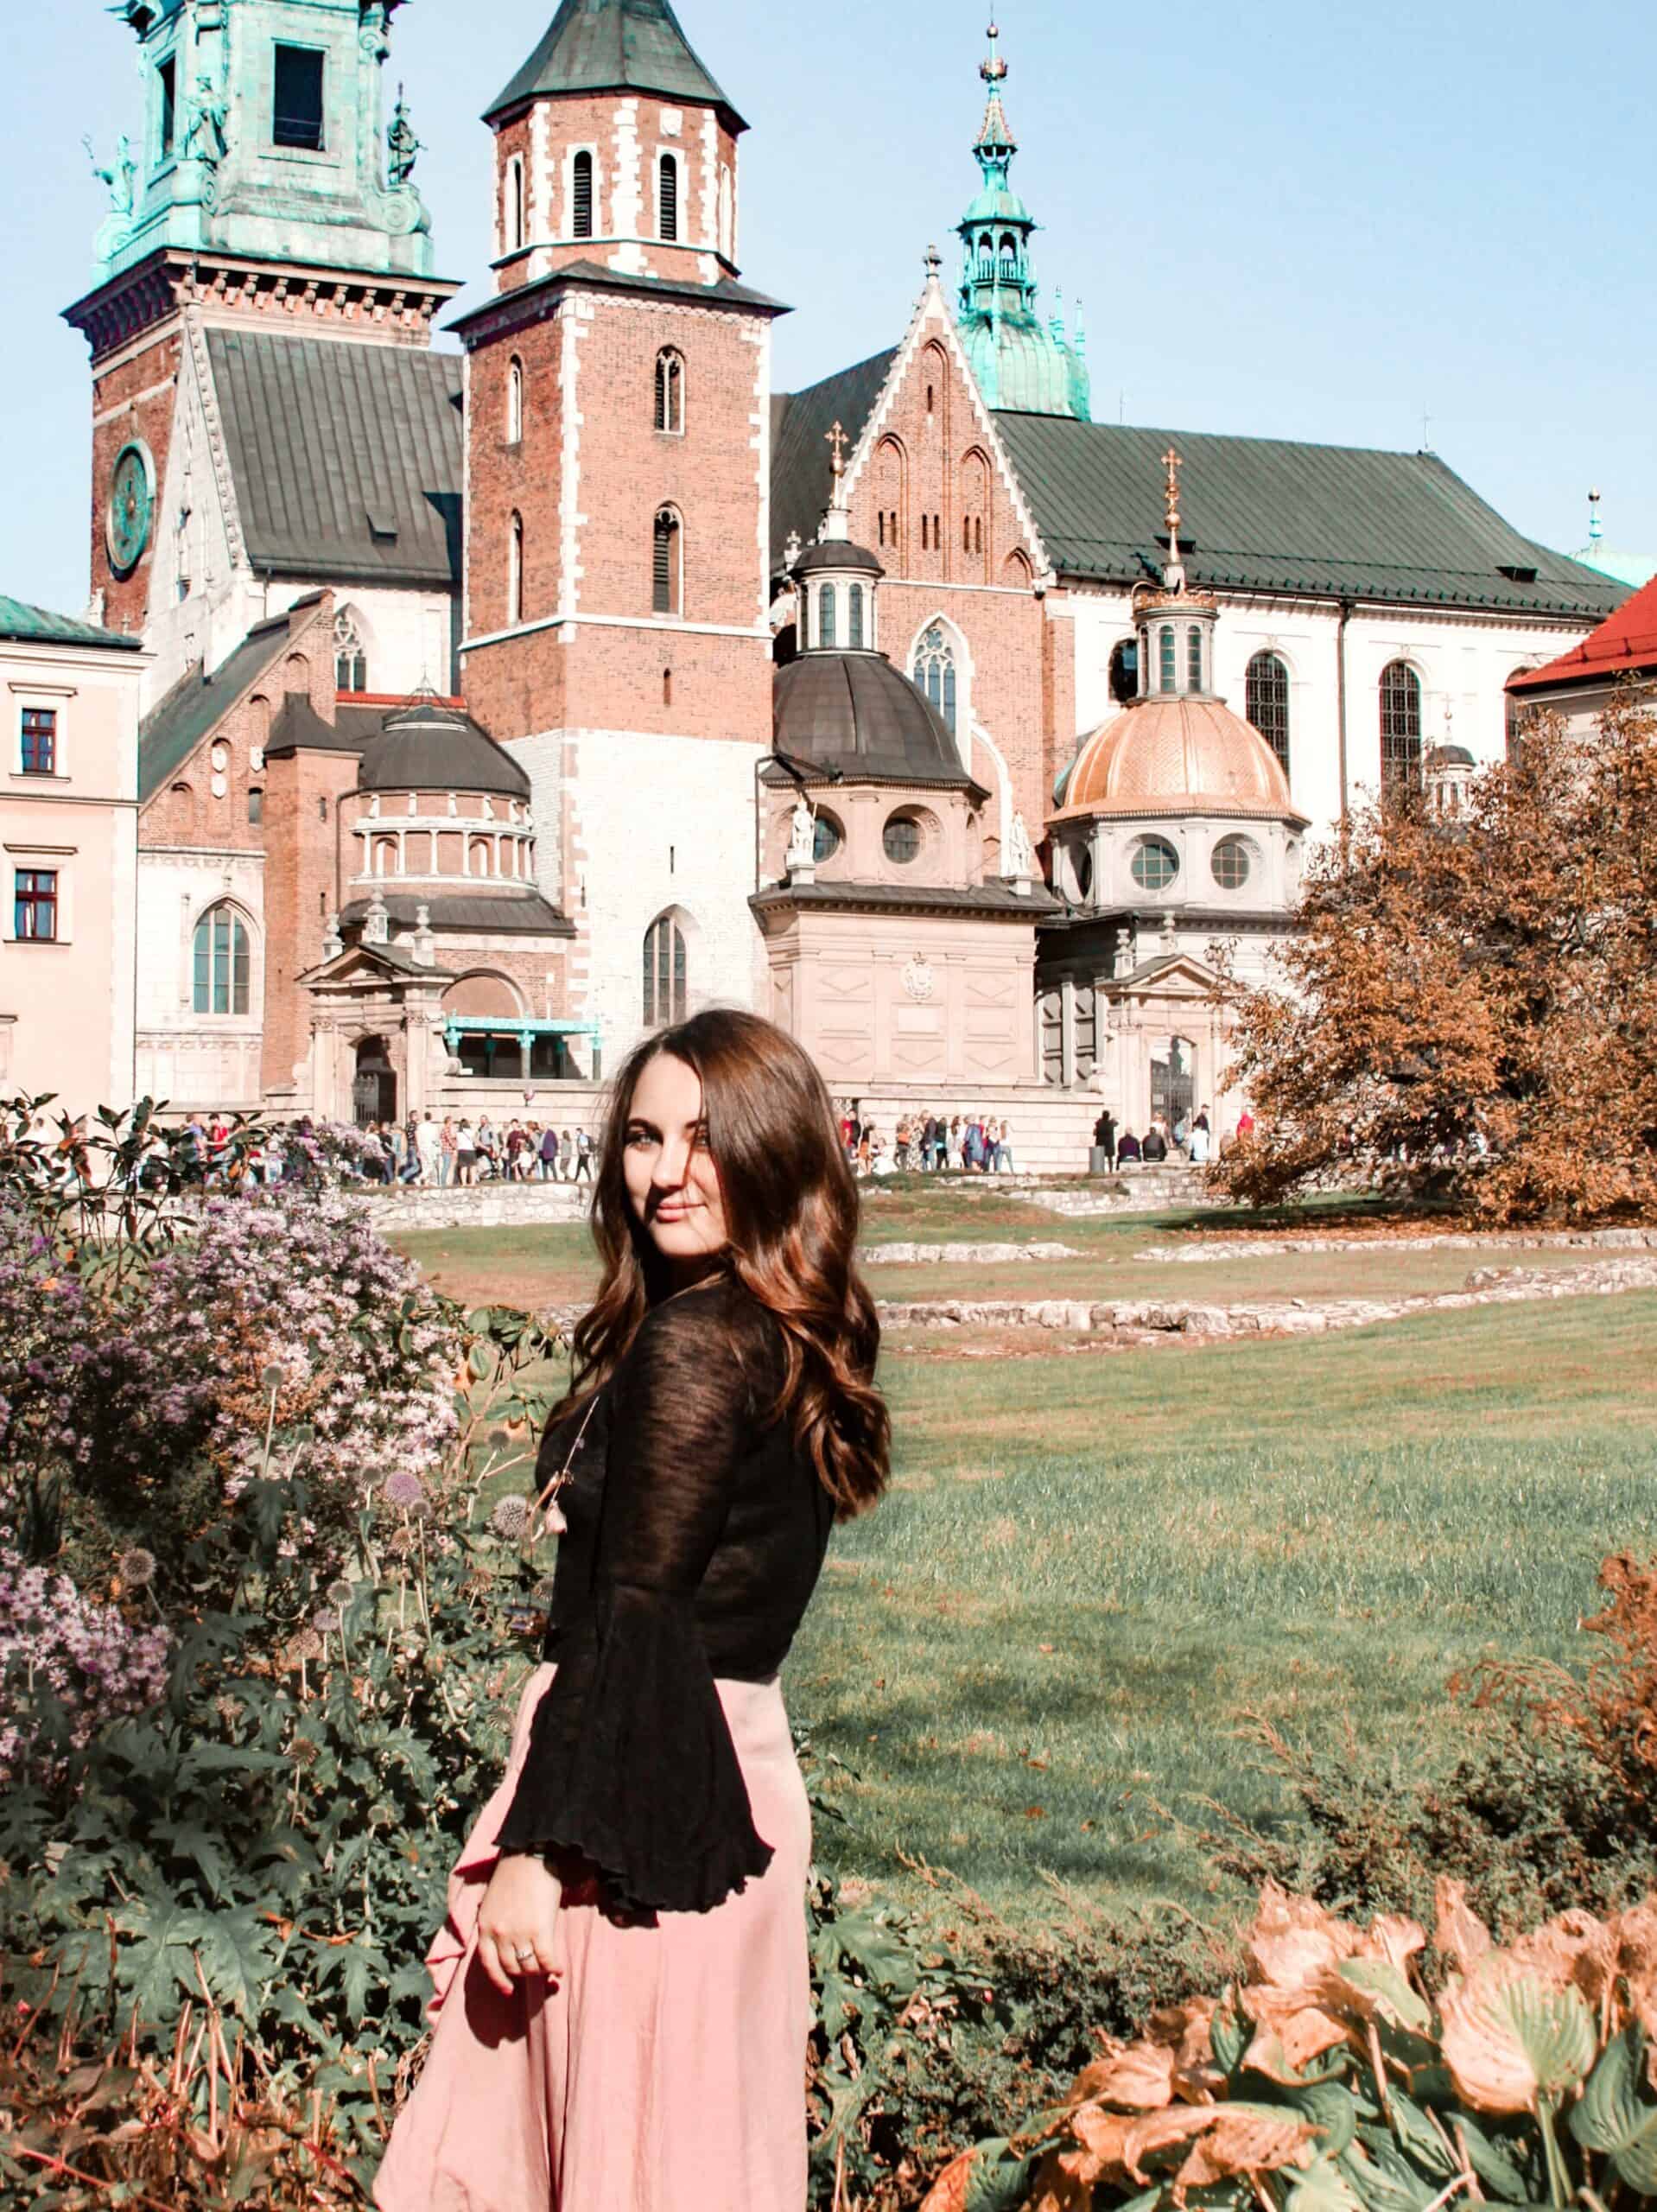 Blog post about visiting Krakow for a weekend